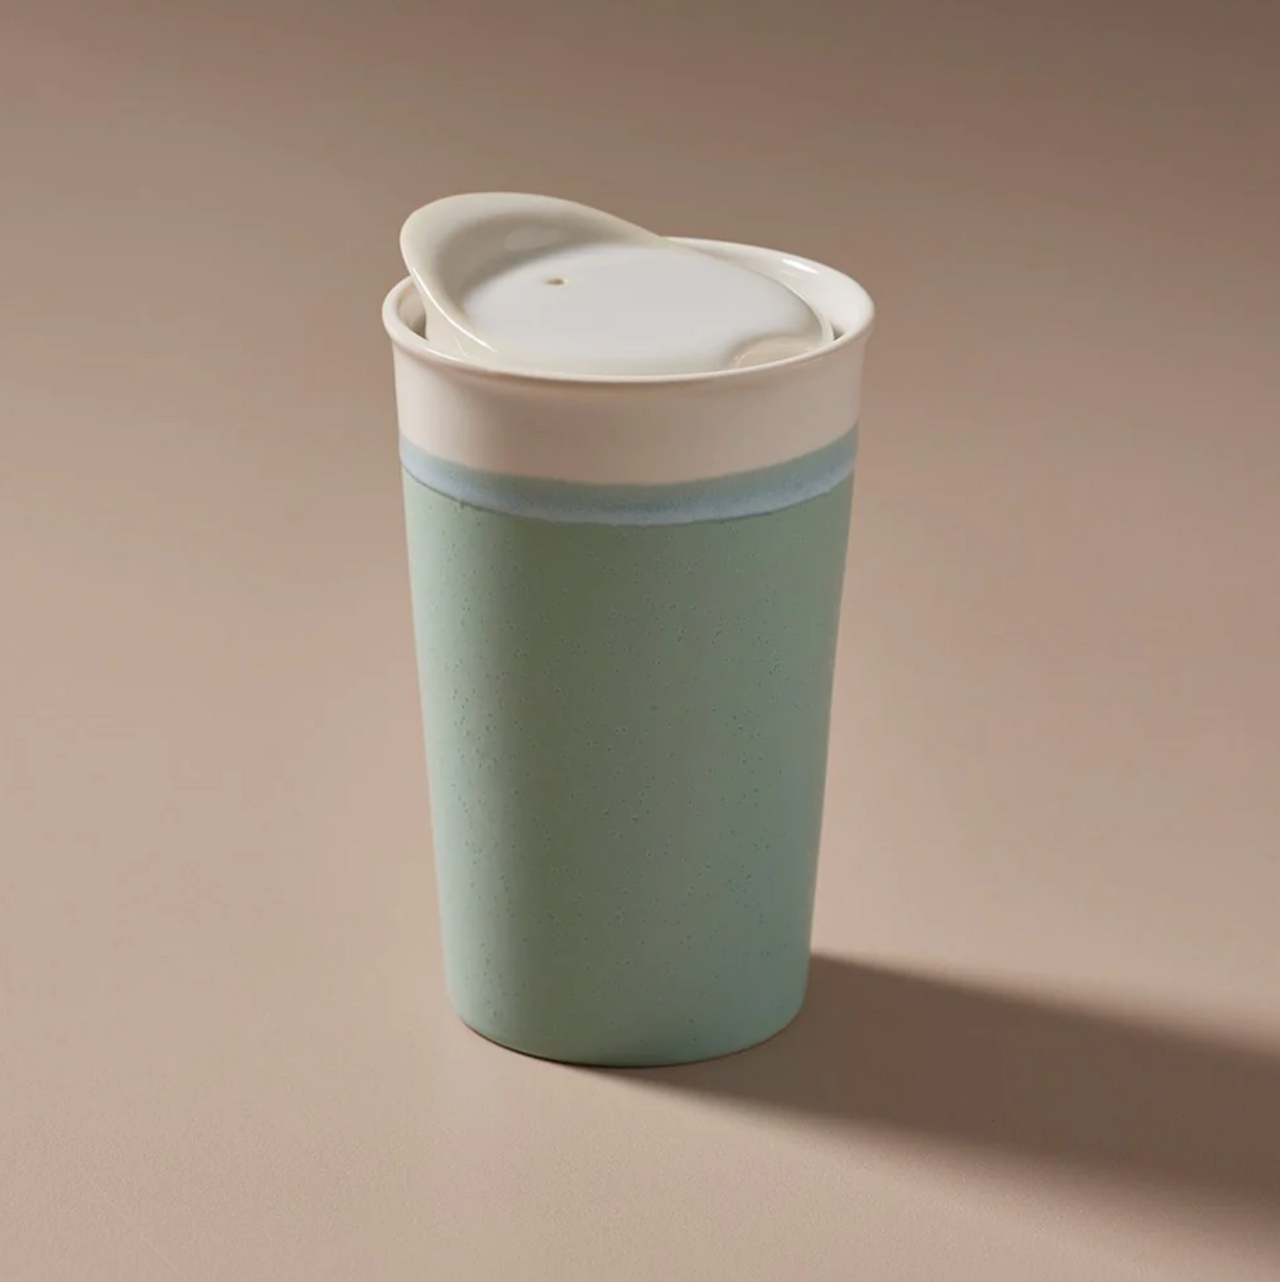 An Indigo Love Keeper Cup - Ceramic - Marine travel mug with a sealable lid sitting on a table.